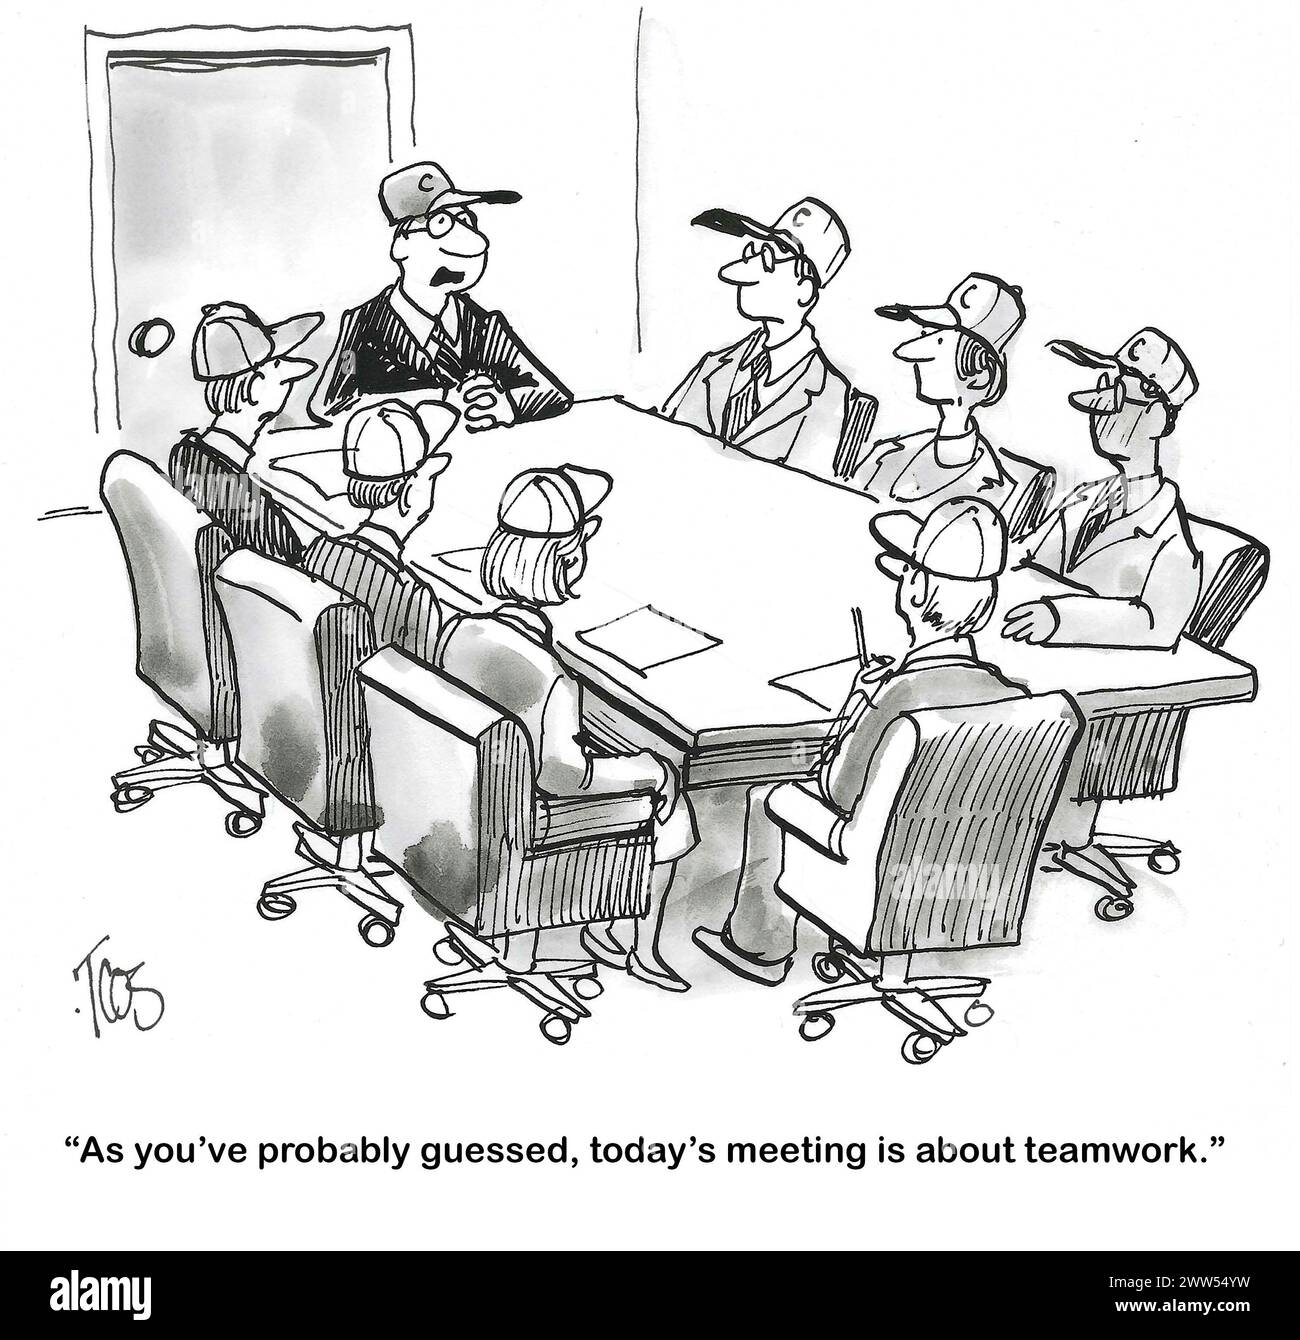 BW cartoon of a team meeting.  All members are wearing baseball caps. Stock Photo